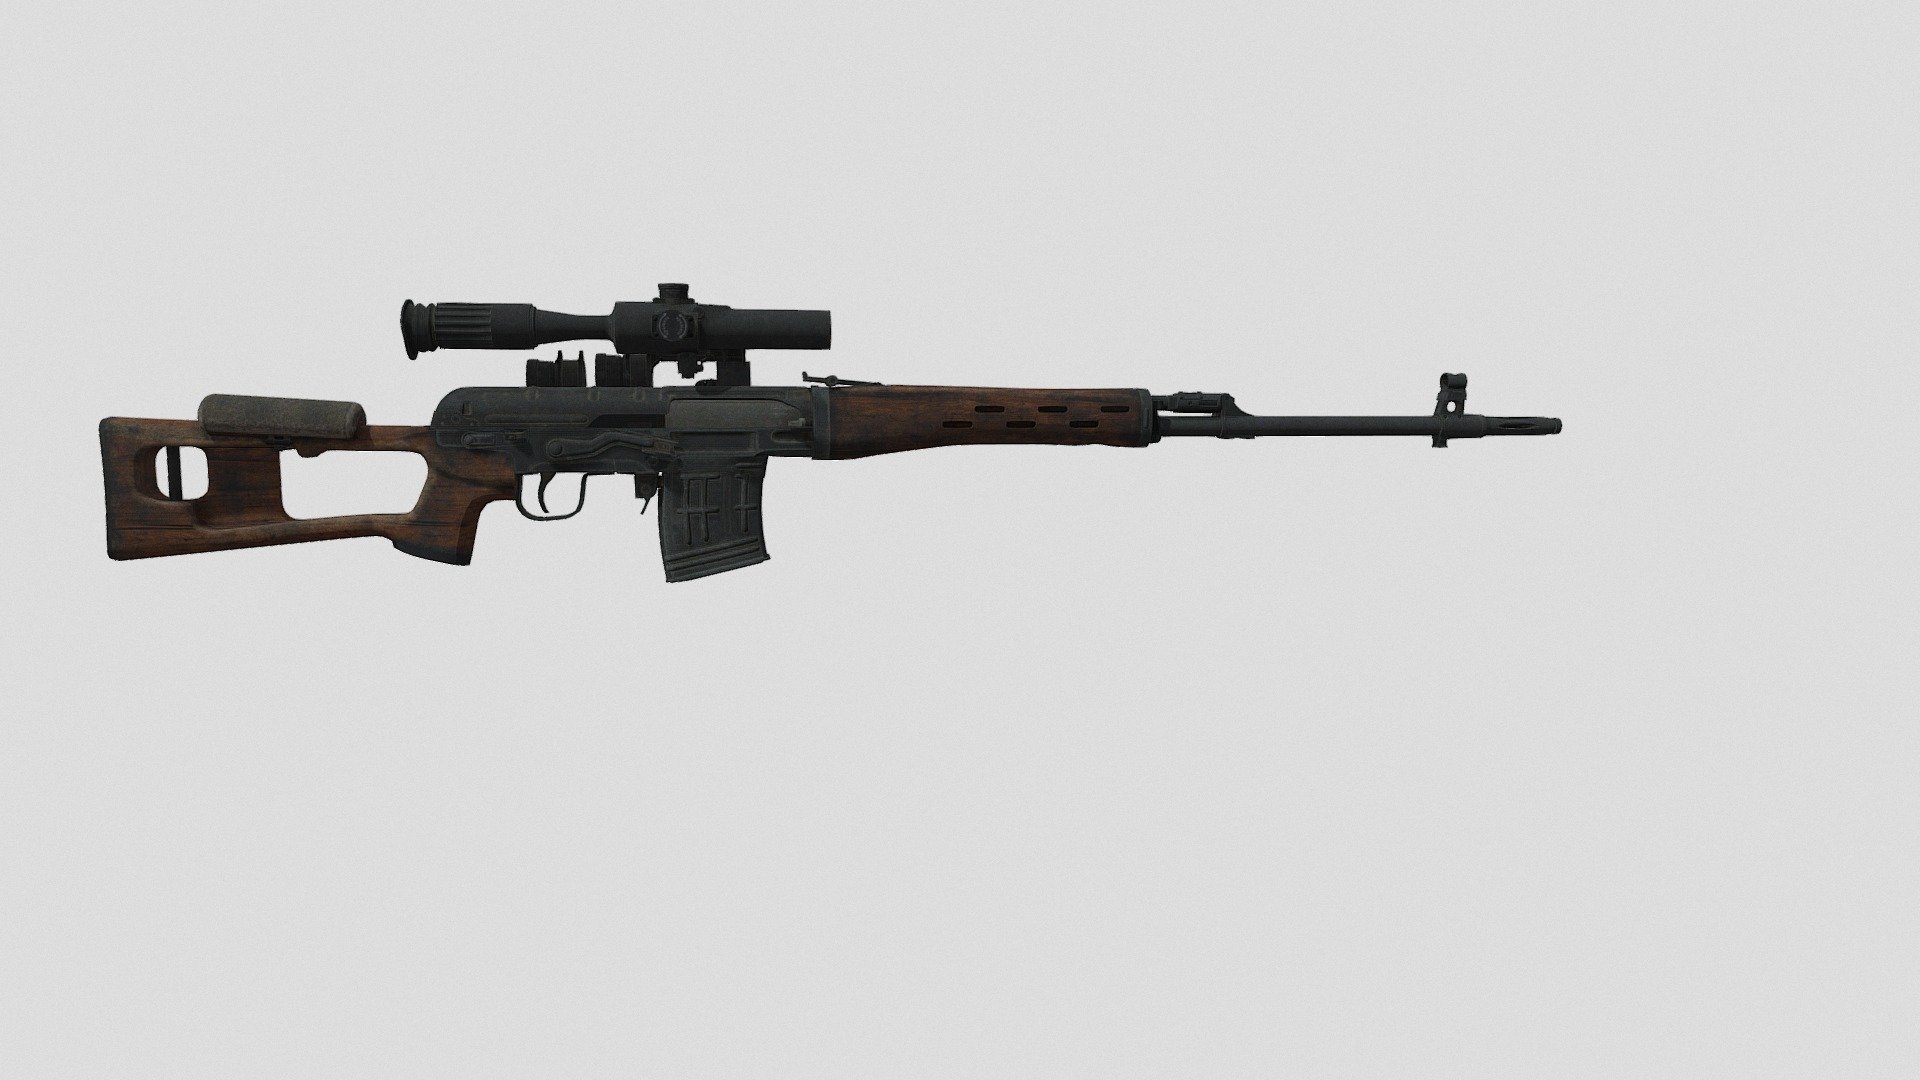 &ldquo;Sniper Rifle, System of Dragunov, Model of the Year 1963